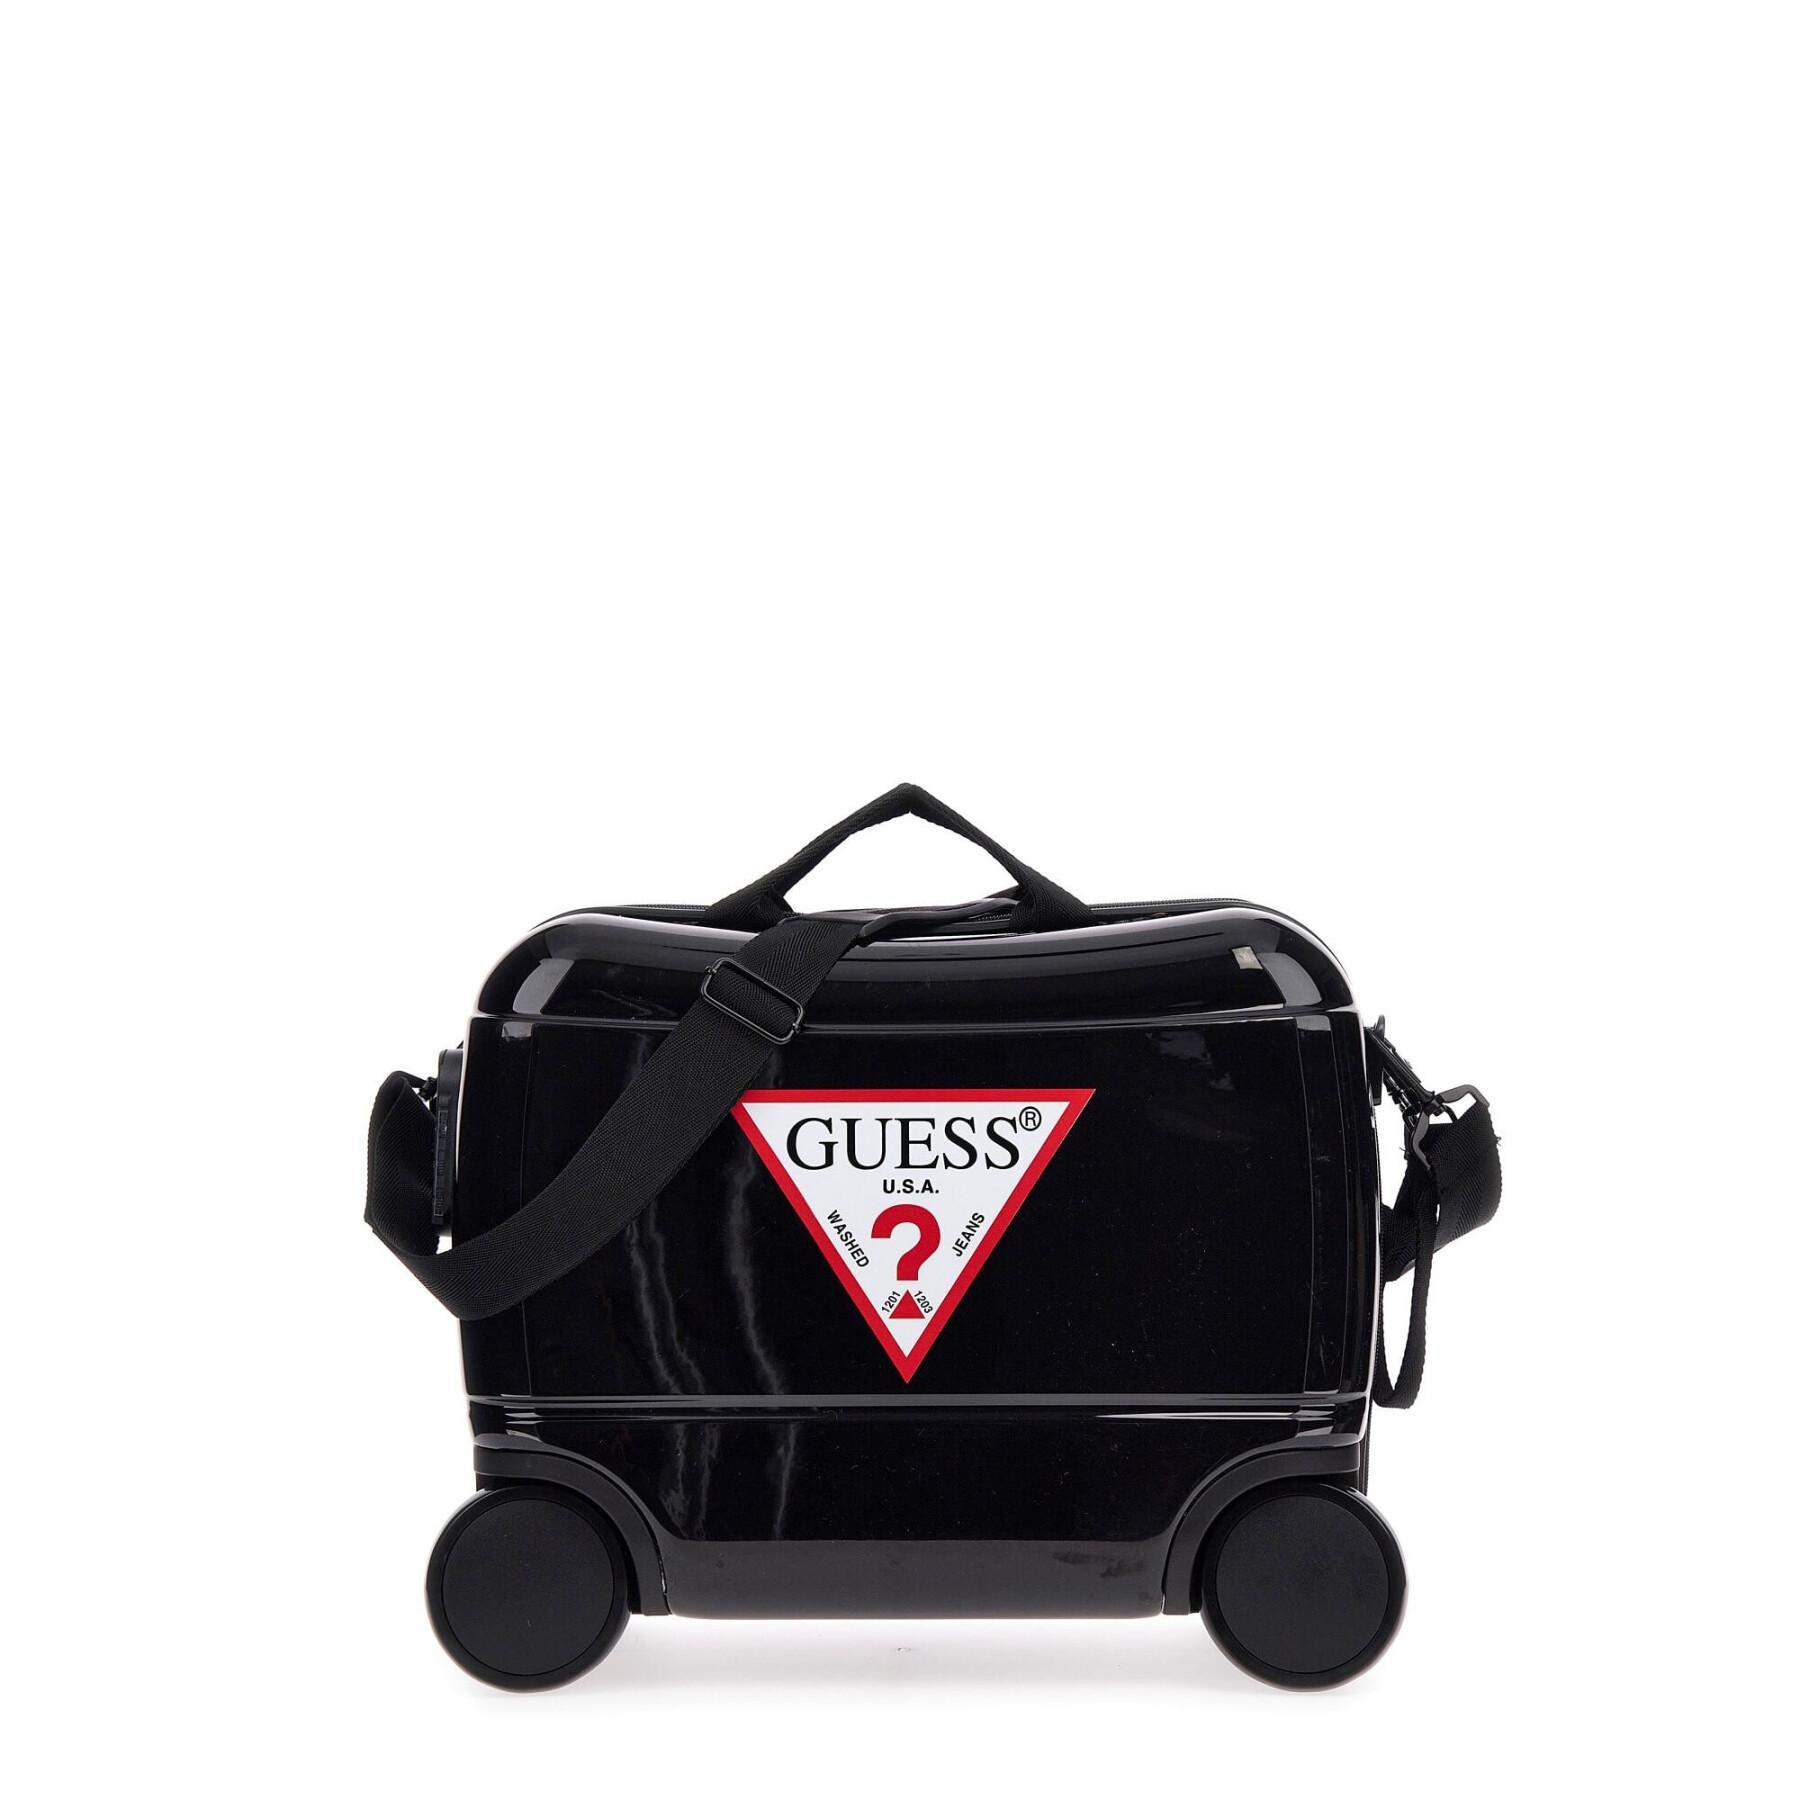 Children's suitcase Guess Trolley